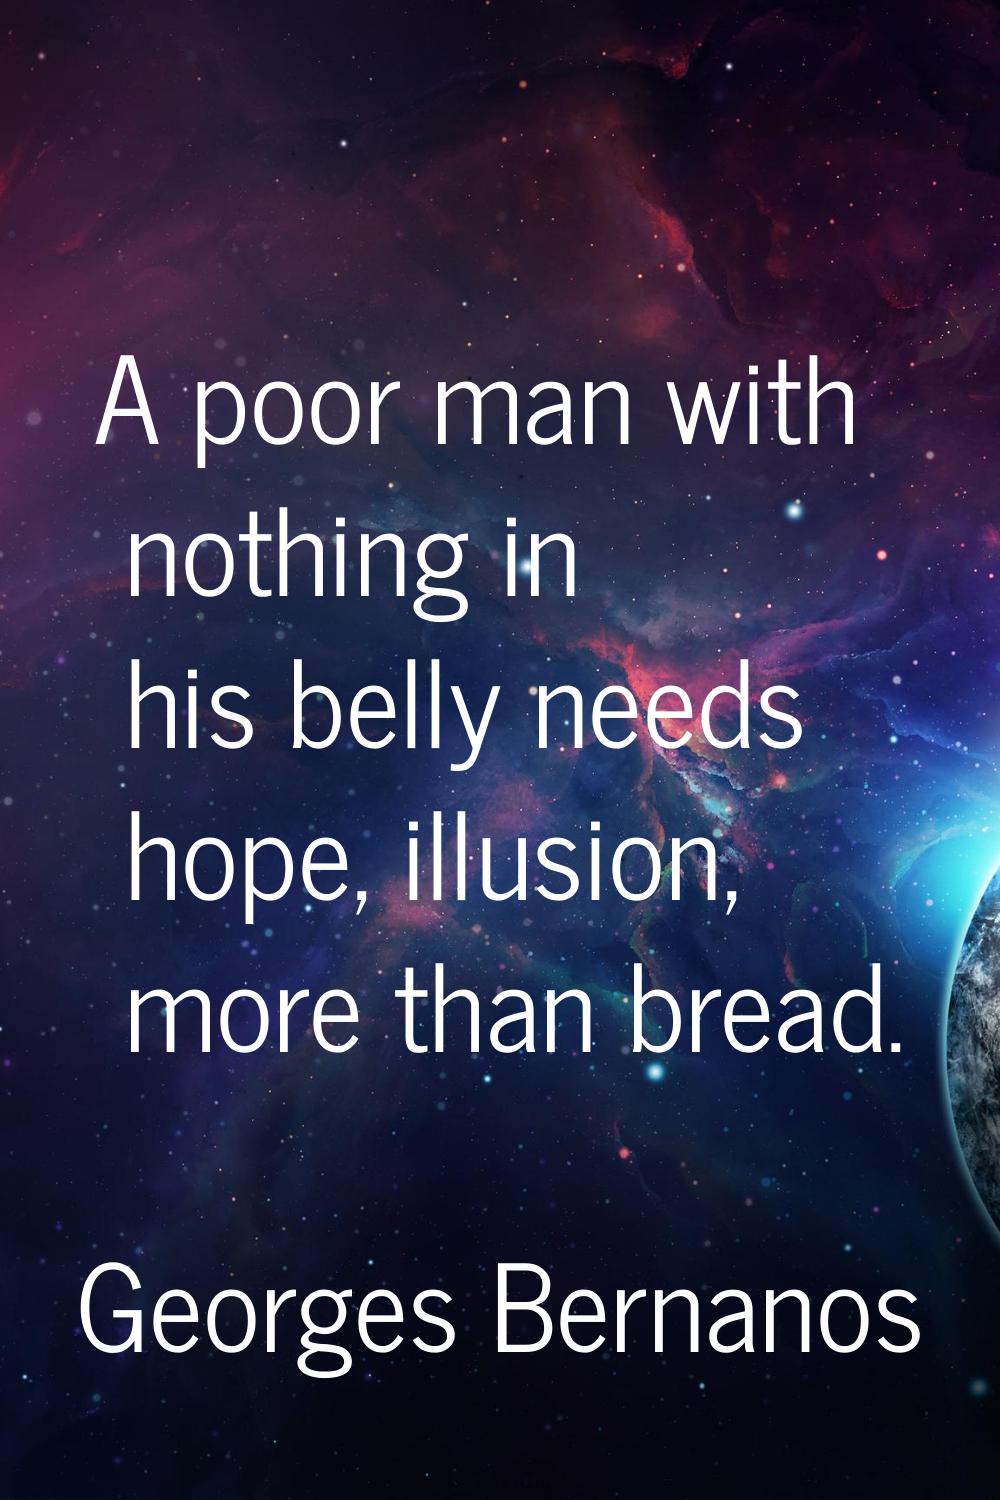 A poor man with nothing in his belly needs hope, illusion, more than bread.